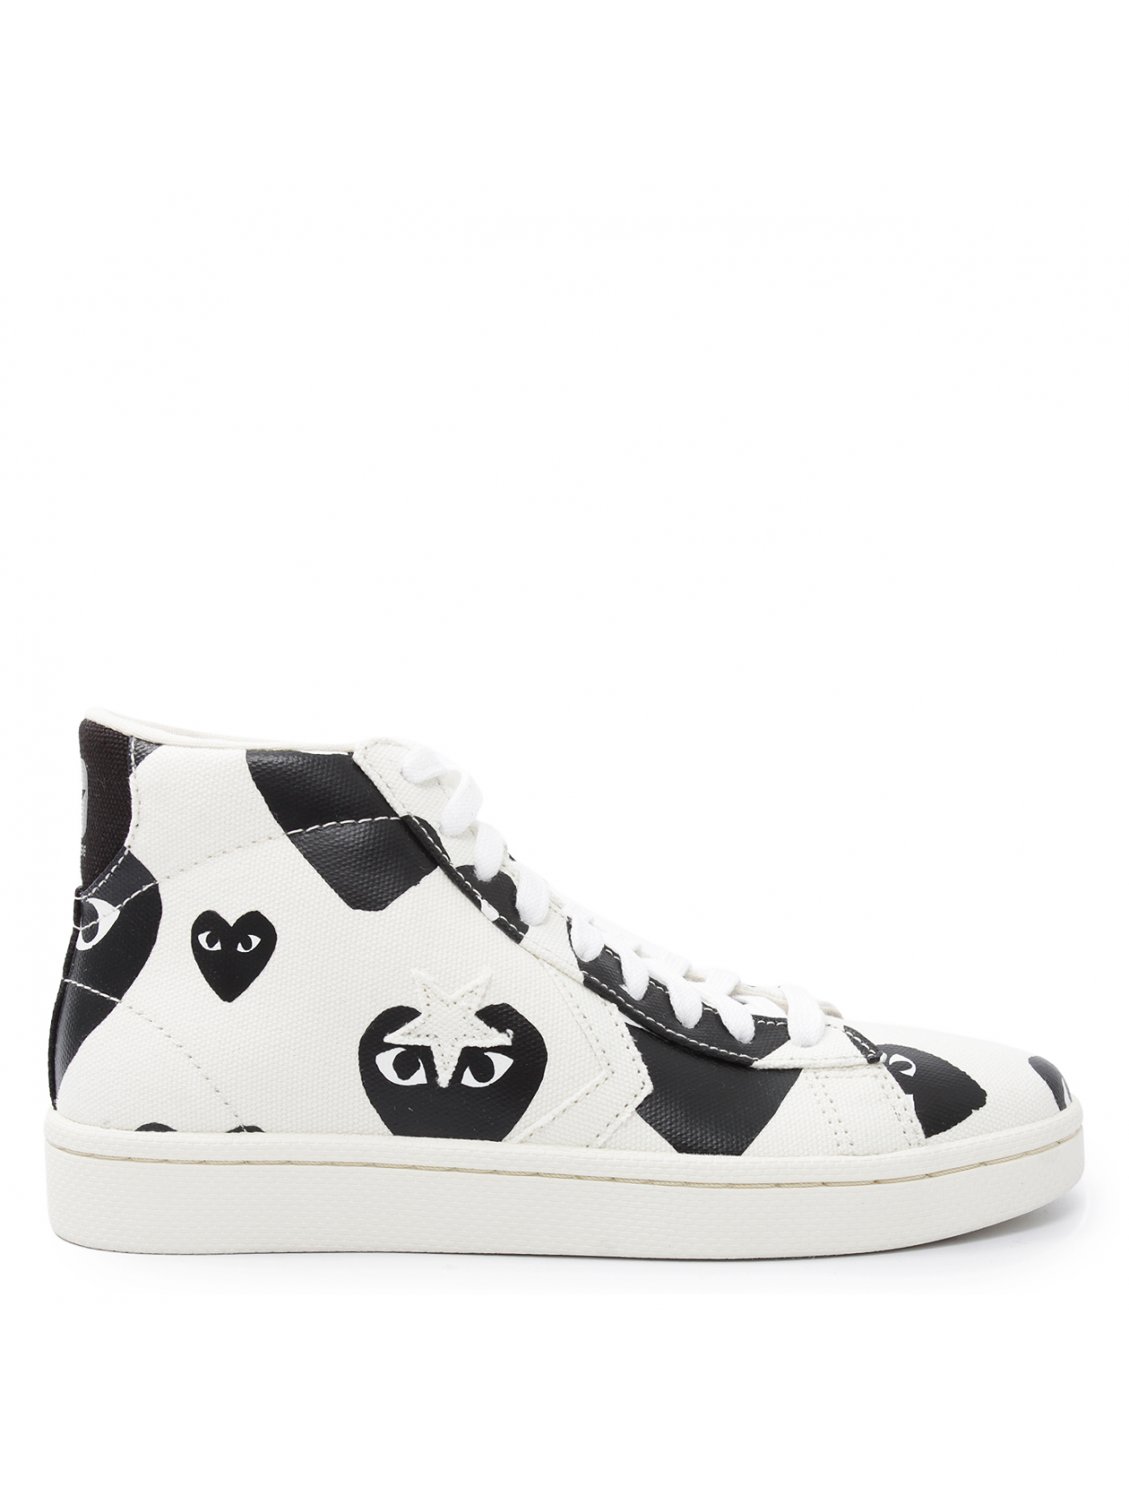 Comme des garçons Unisex Play Pro Leather Mid Trainers White in Black ...